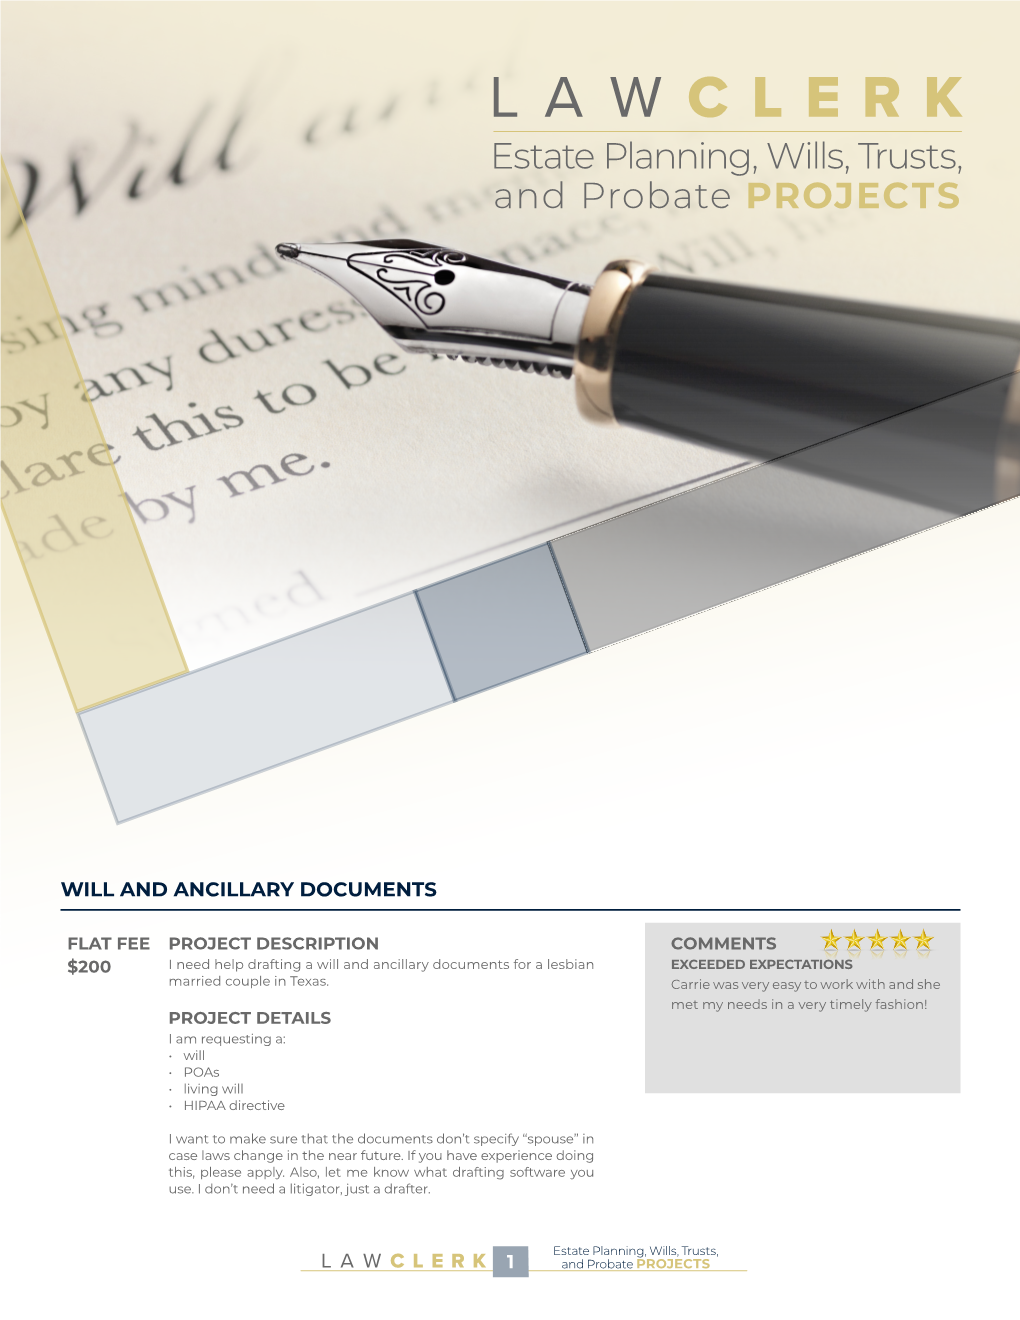 Estate Planning, Wills, Trusts, and Probate PROJECTS